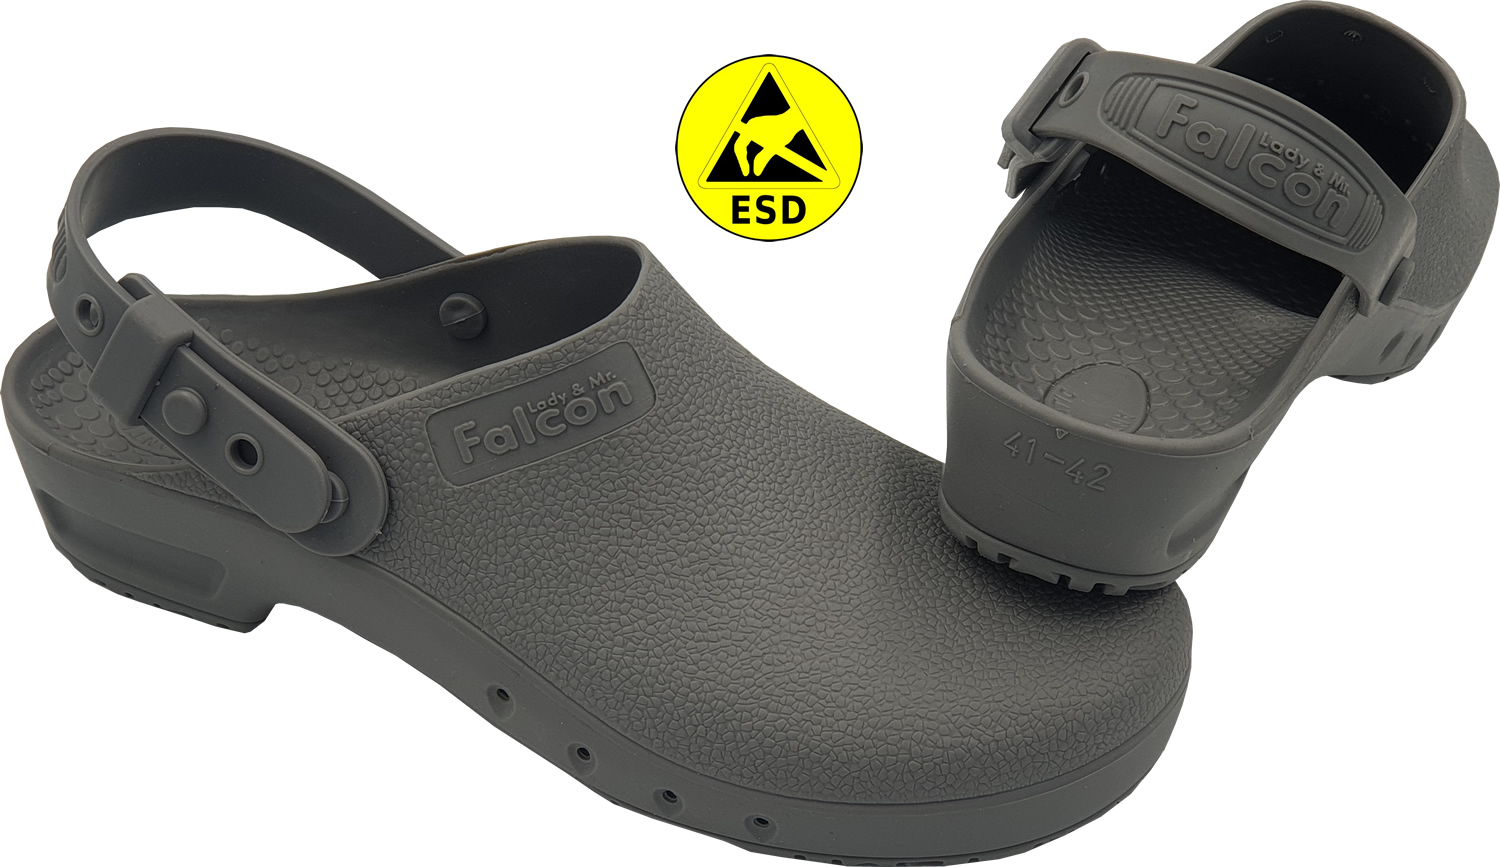 Antistatic ESD Clog Safety Strap AATAESD OT Clogs